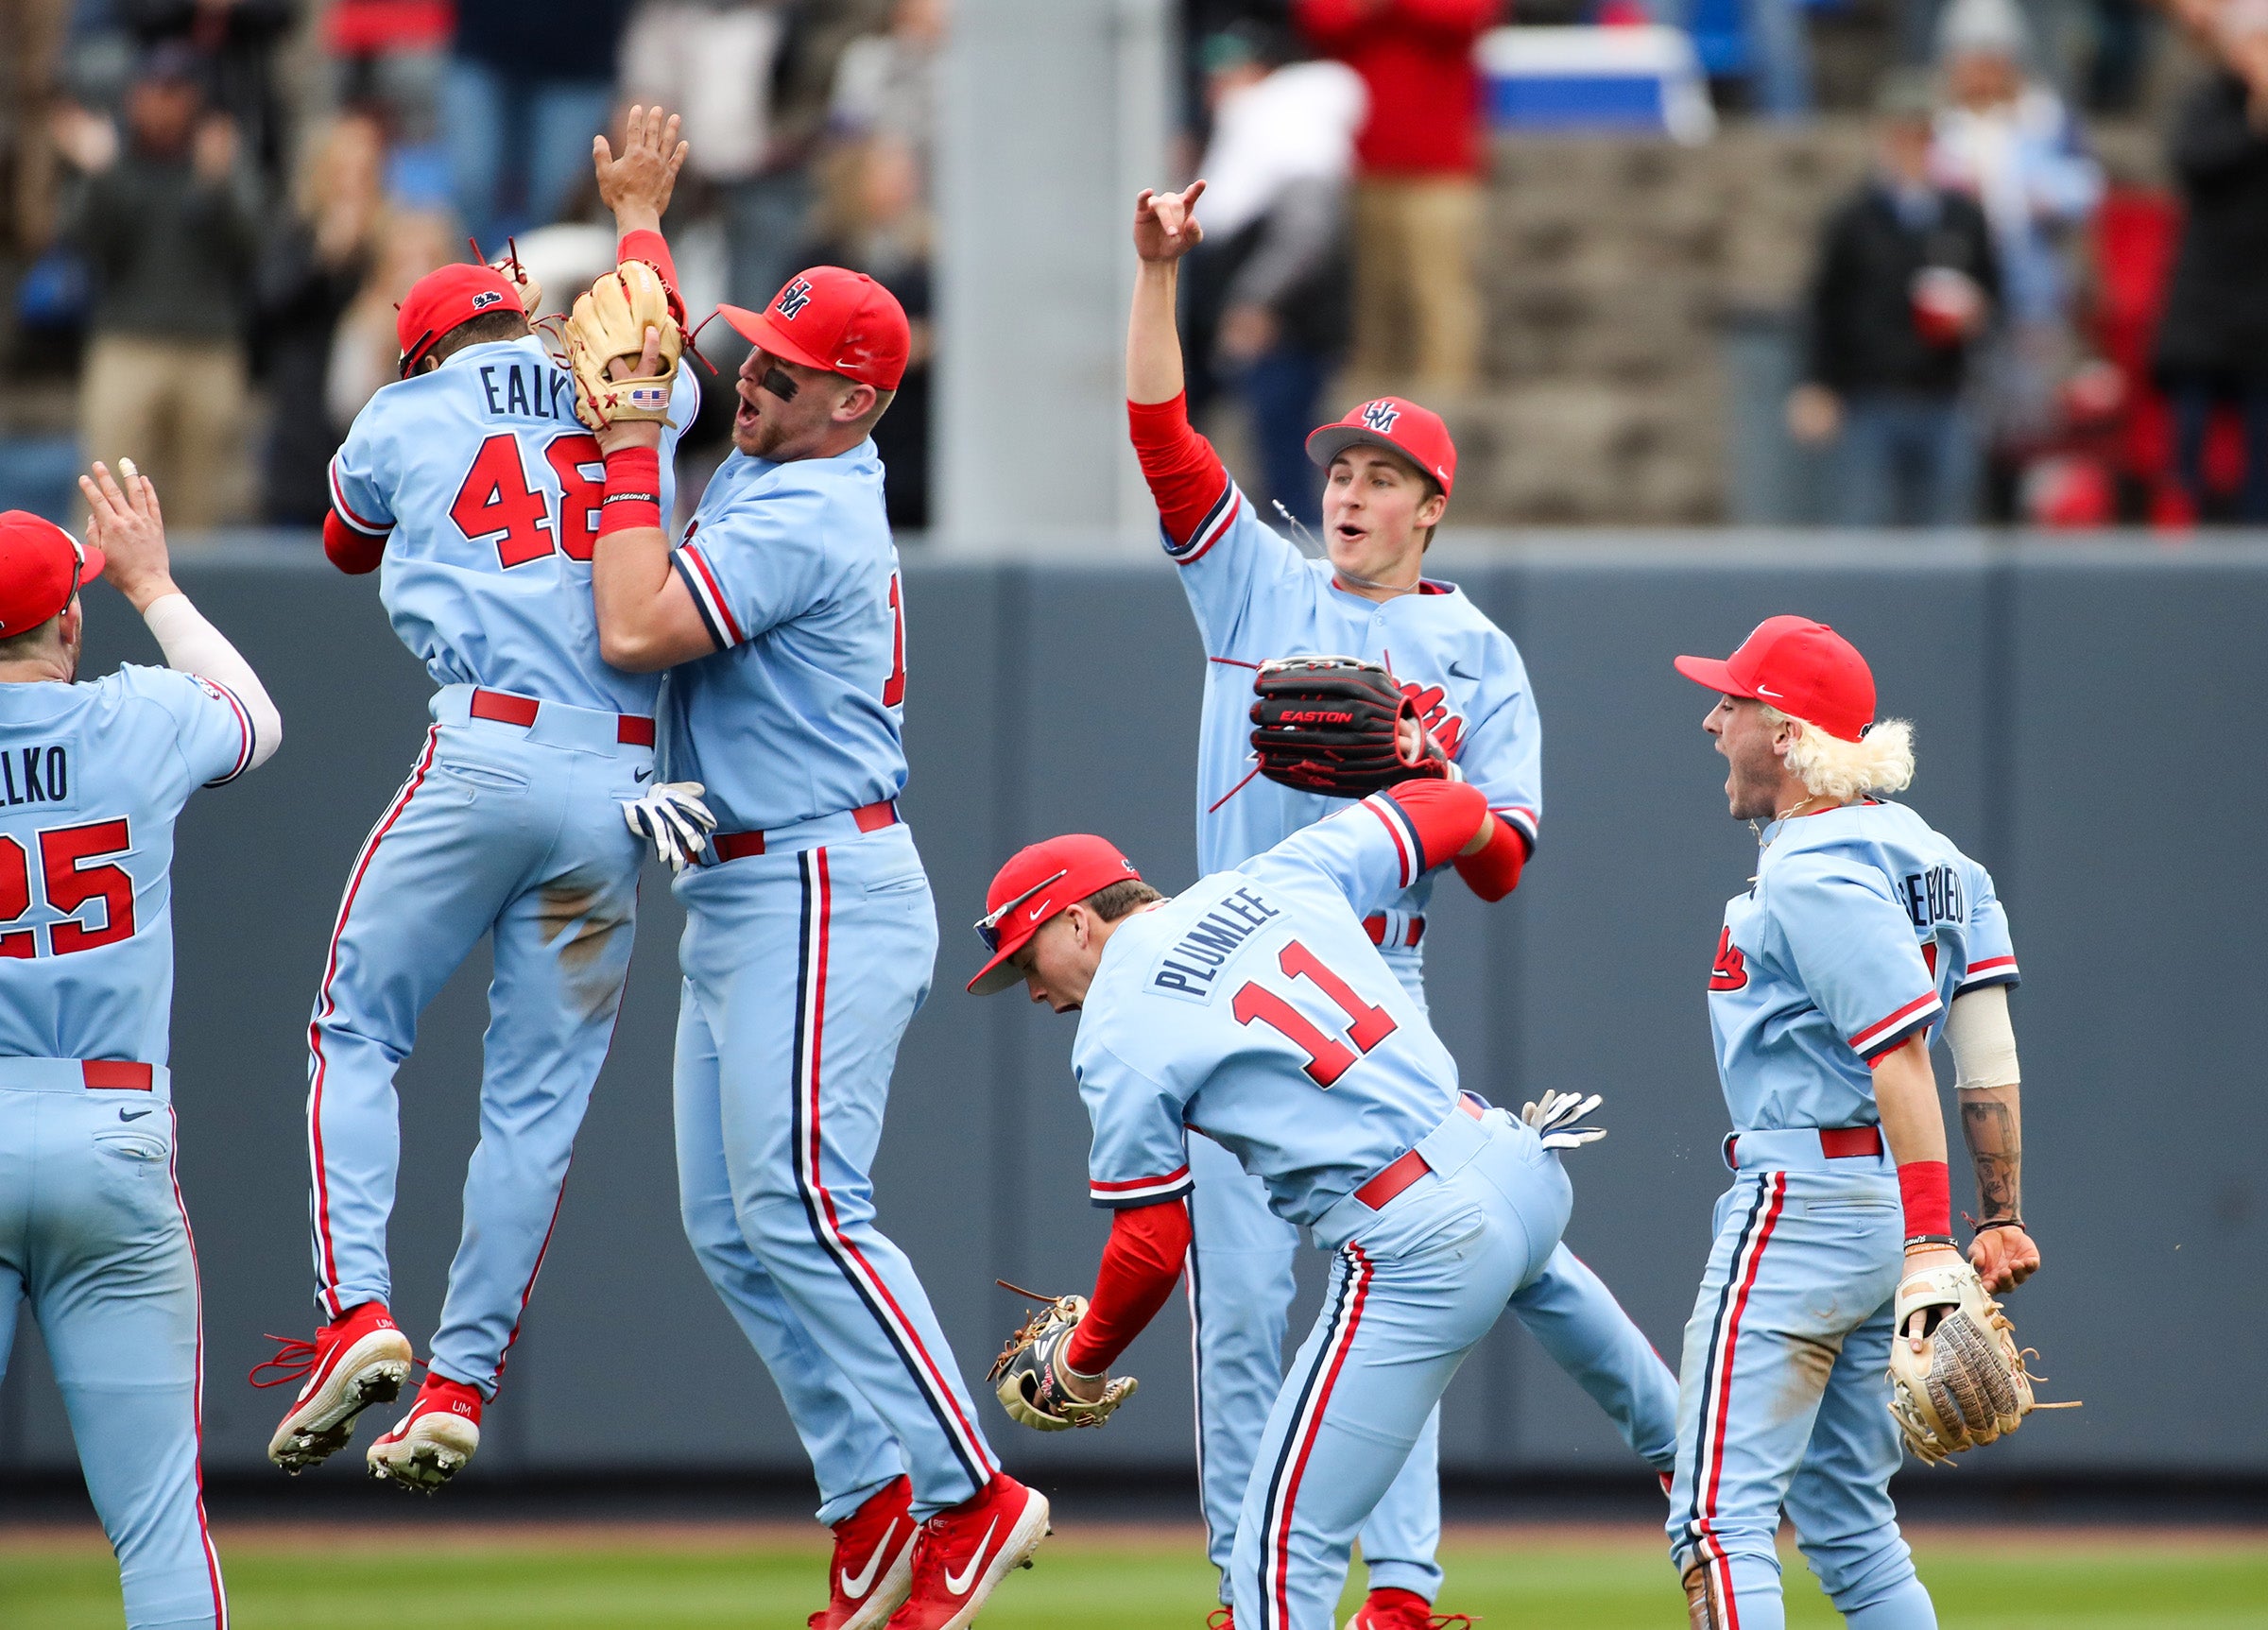 Ole Miss baseball announces 2021 schedule - The Oxford Eagle